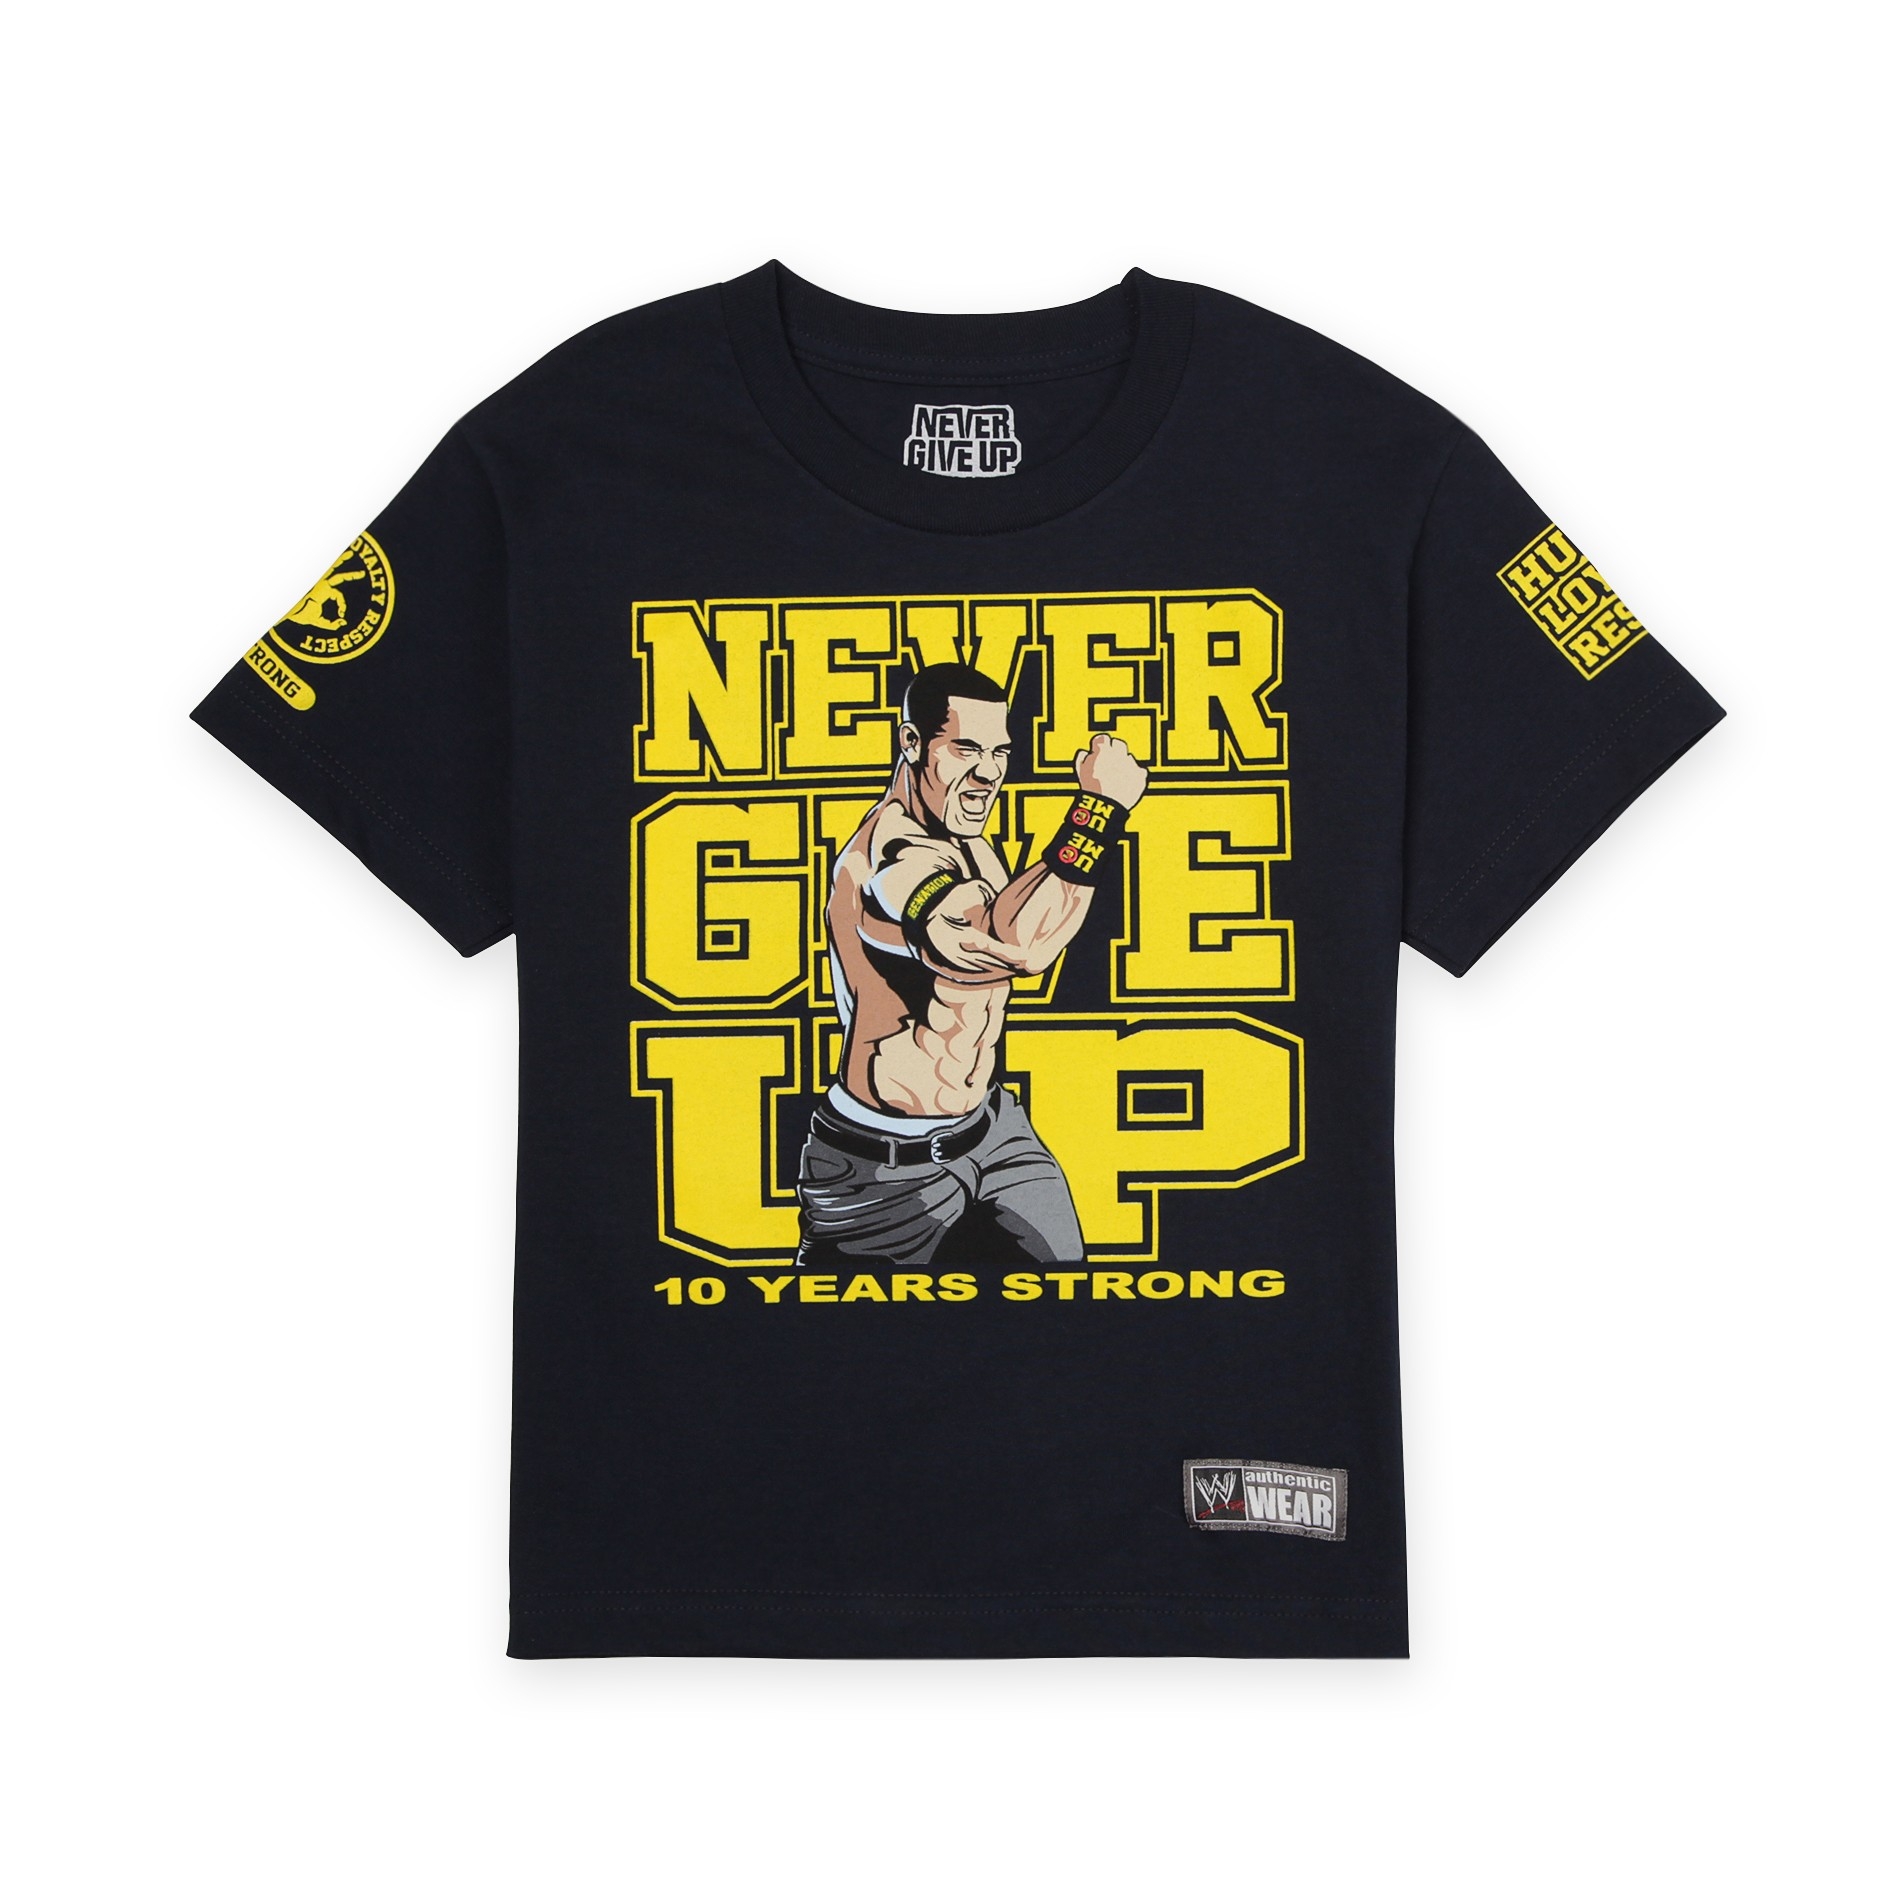 WWE Boy's Graphic T-Shirt - Never Give Up